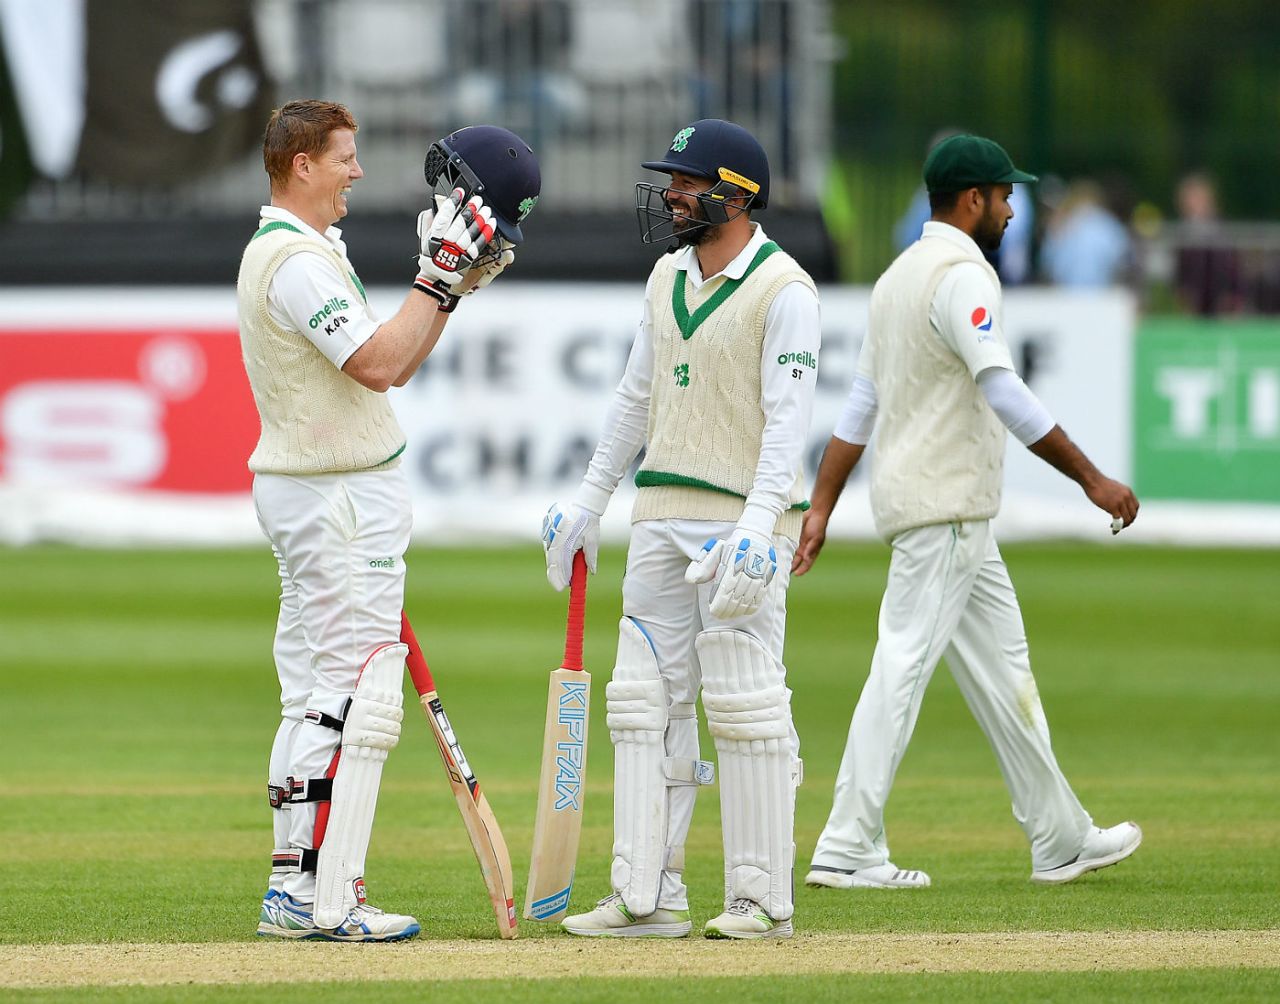 Kevin O'Brien and Stuart Thompson built a big stand for the seventh wicket, Ireland v Pakistan, Only Test, Malahide, 4th day, May 14, 2018